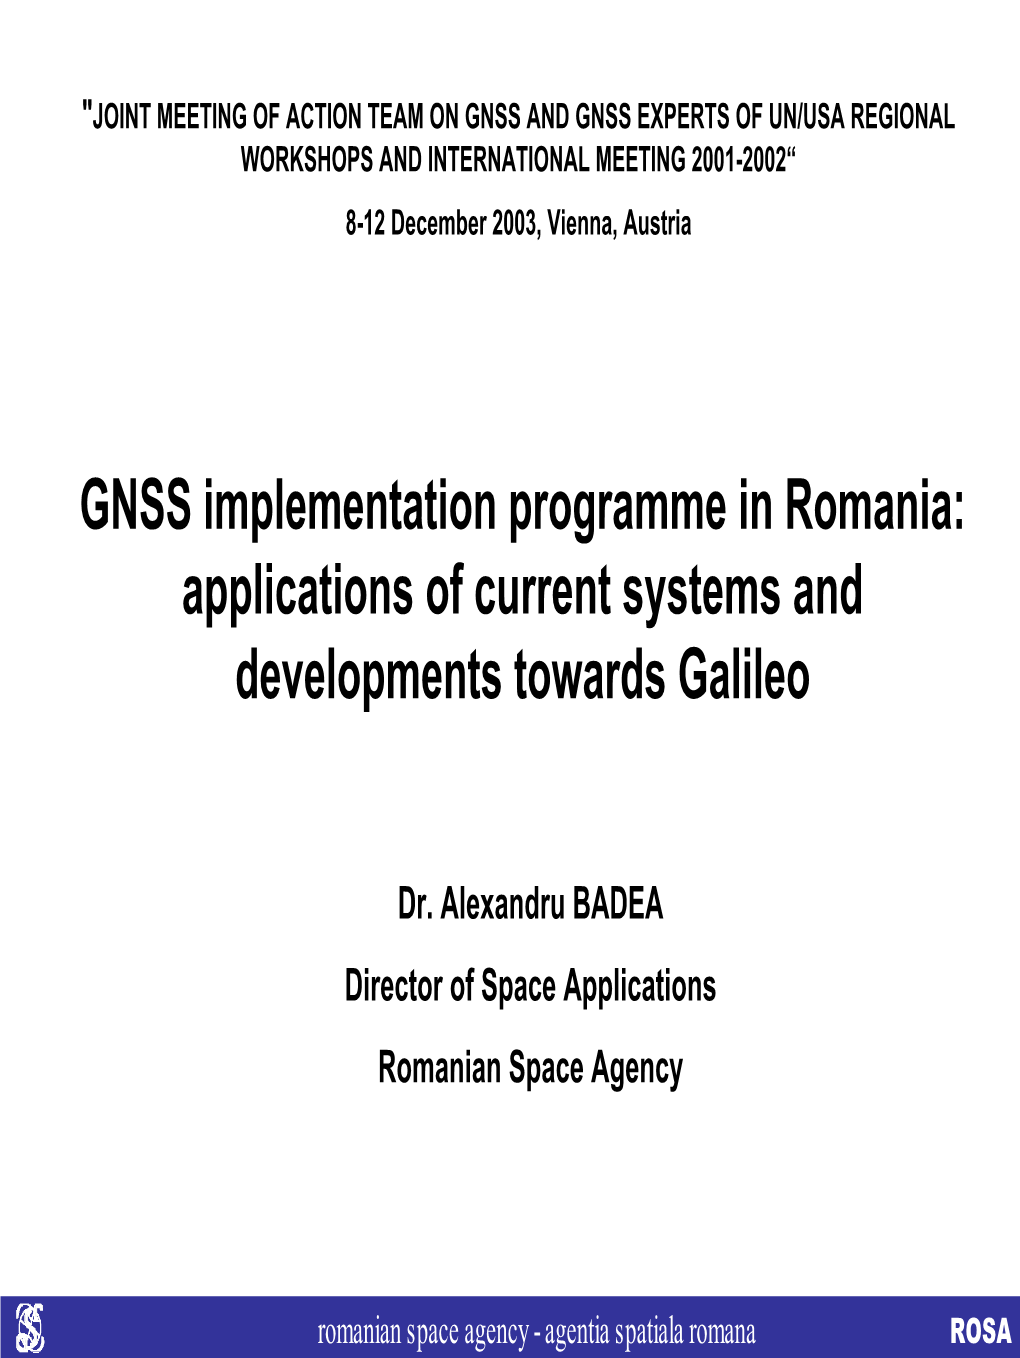 GNSS Implementation Programme in Romania: Applications of Current Systems and Developments Towards Galileo